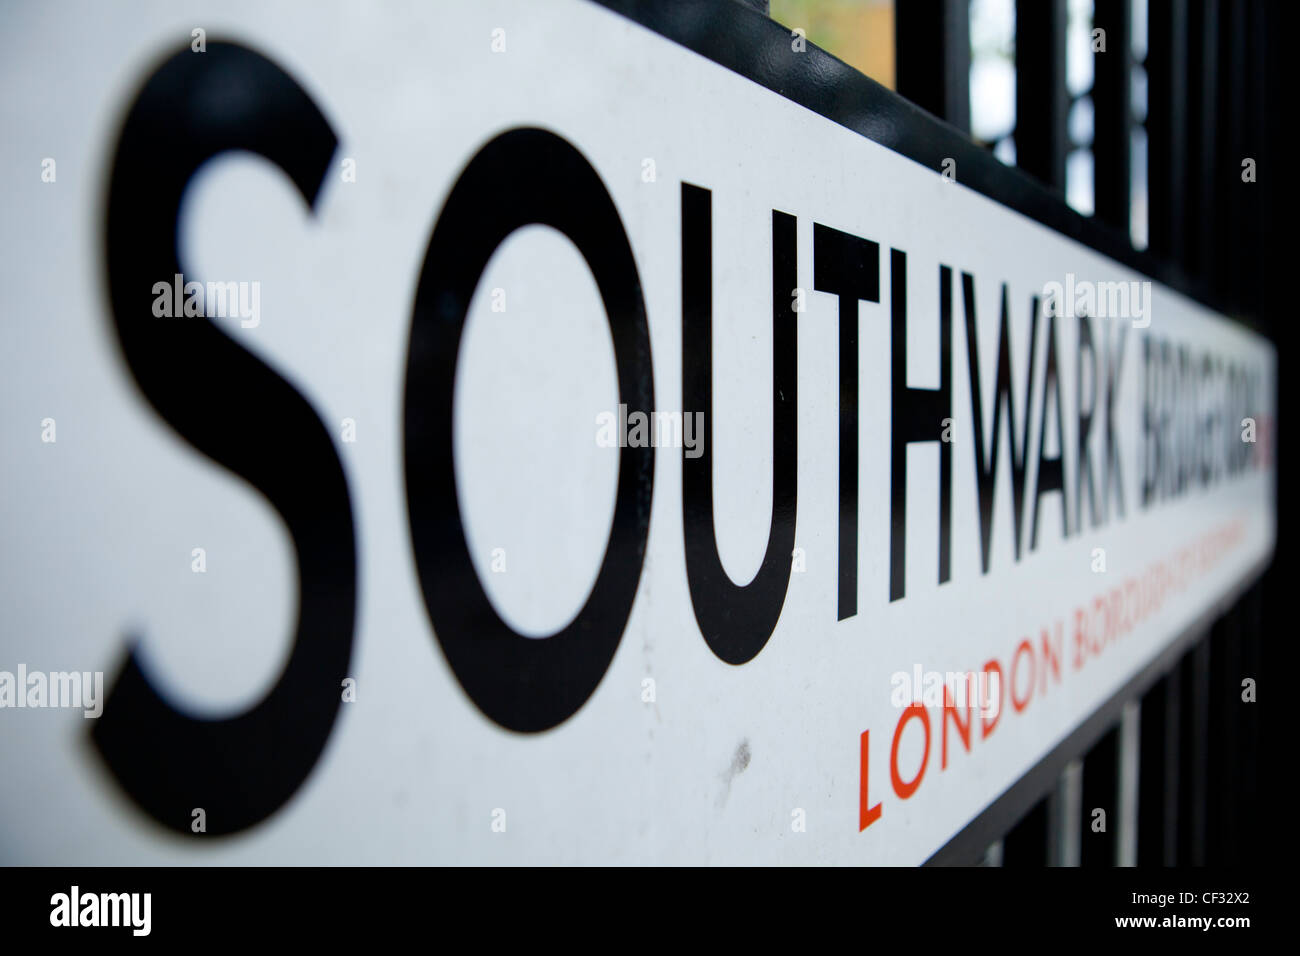 A view of the sign for Southwark Bridge Road in the London Borough of Southwark Stock Photo